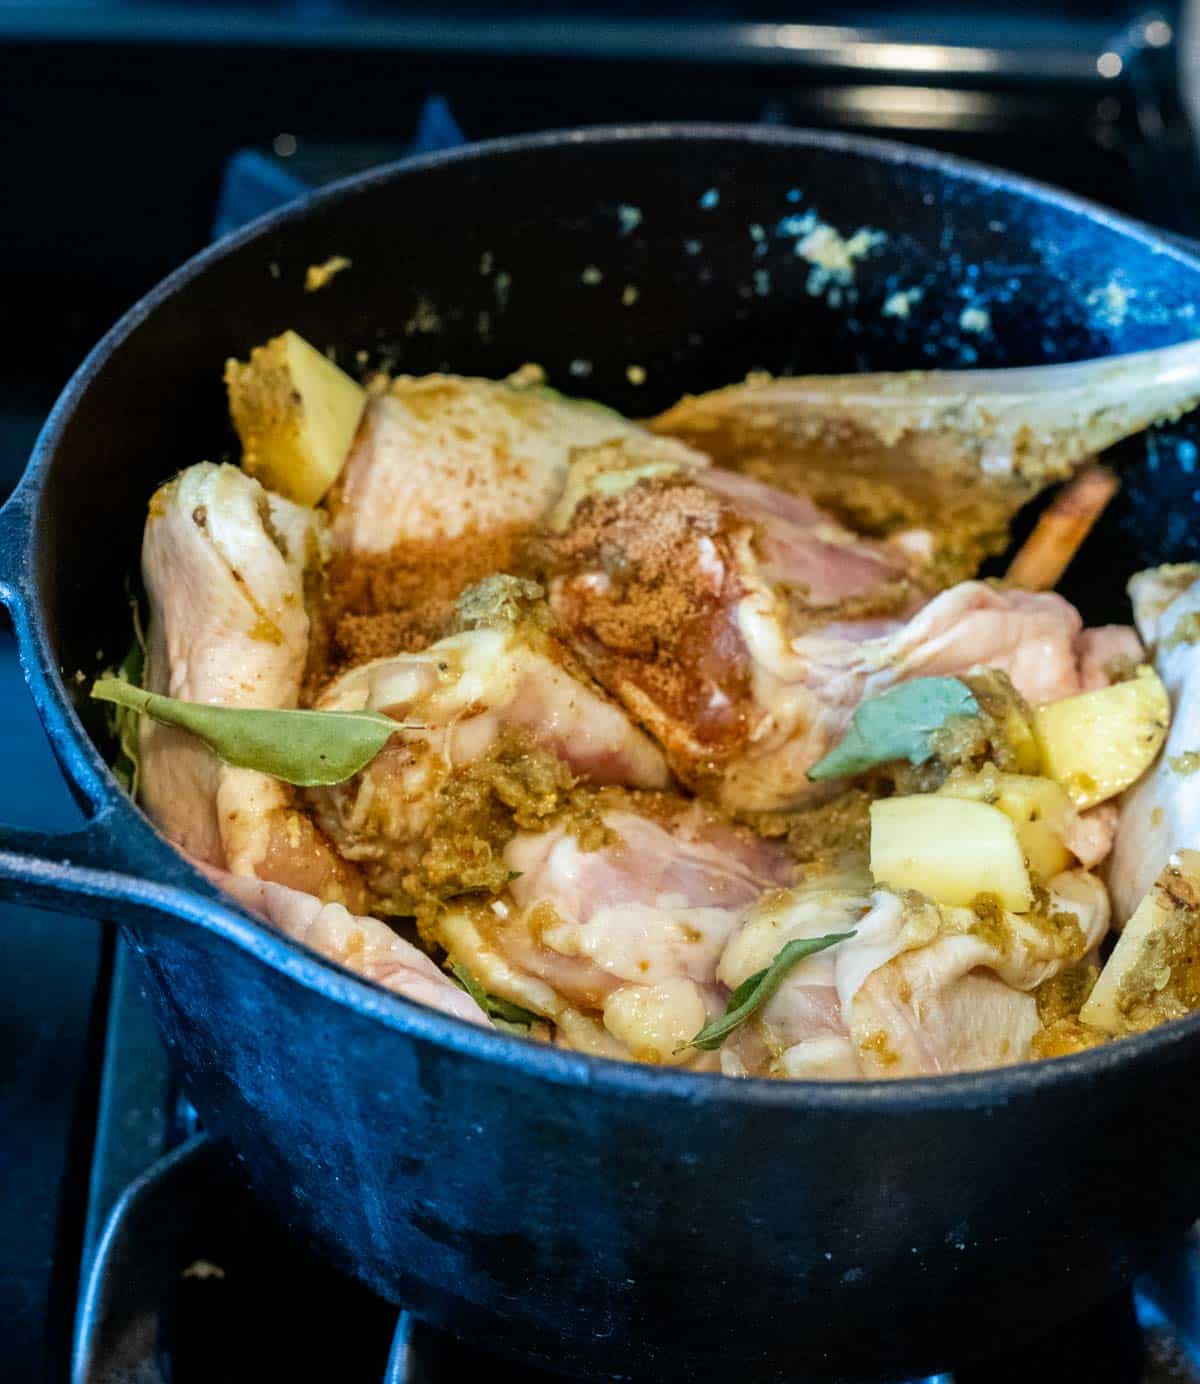 Chicken thighs, potatoes and remaining curry ingredients added to the Dutch oven.